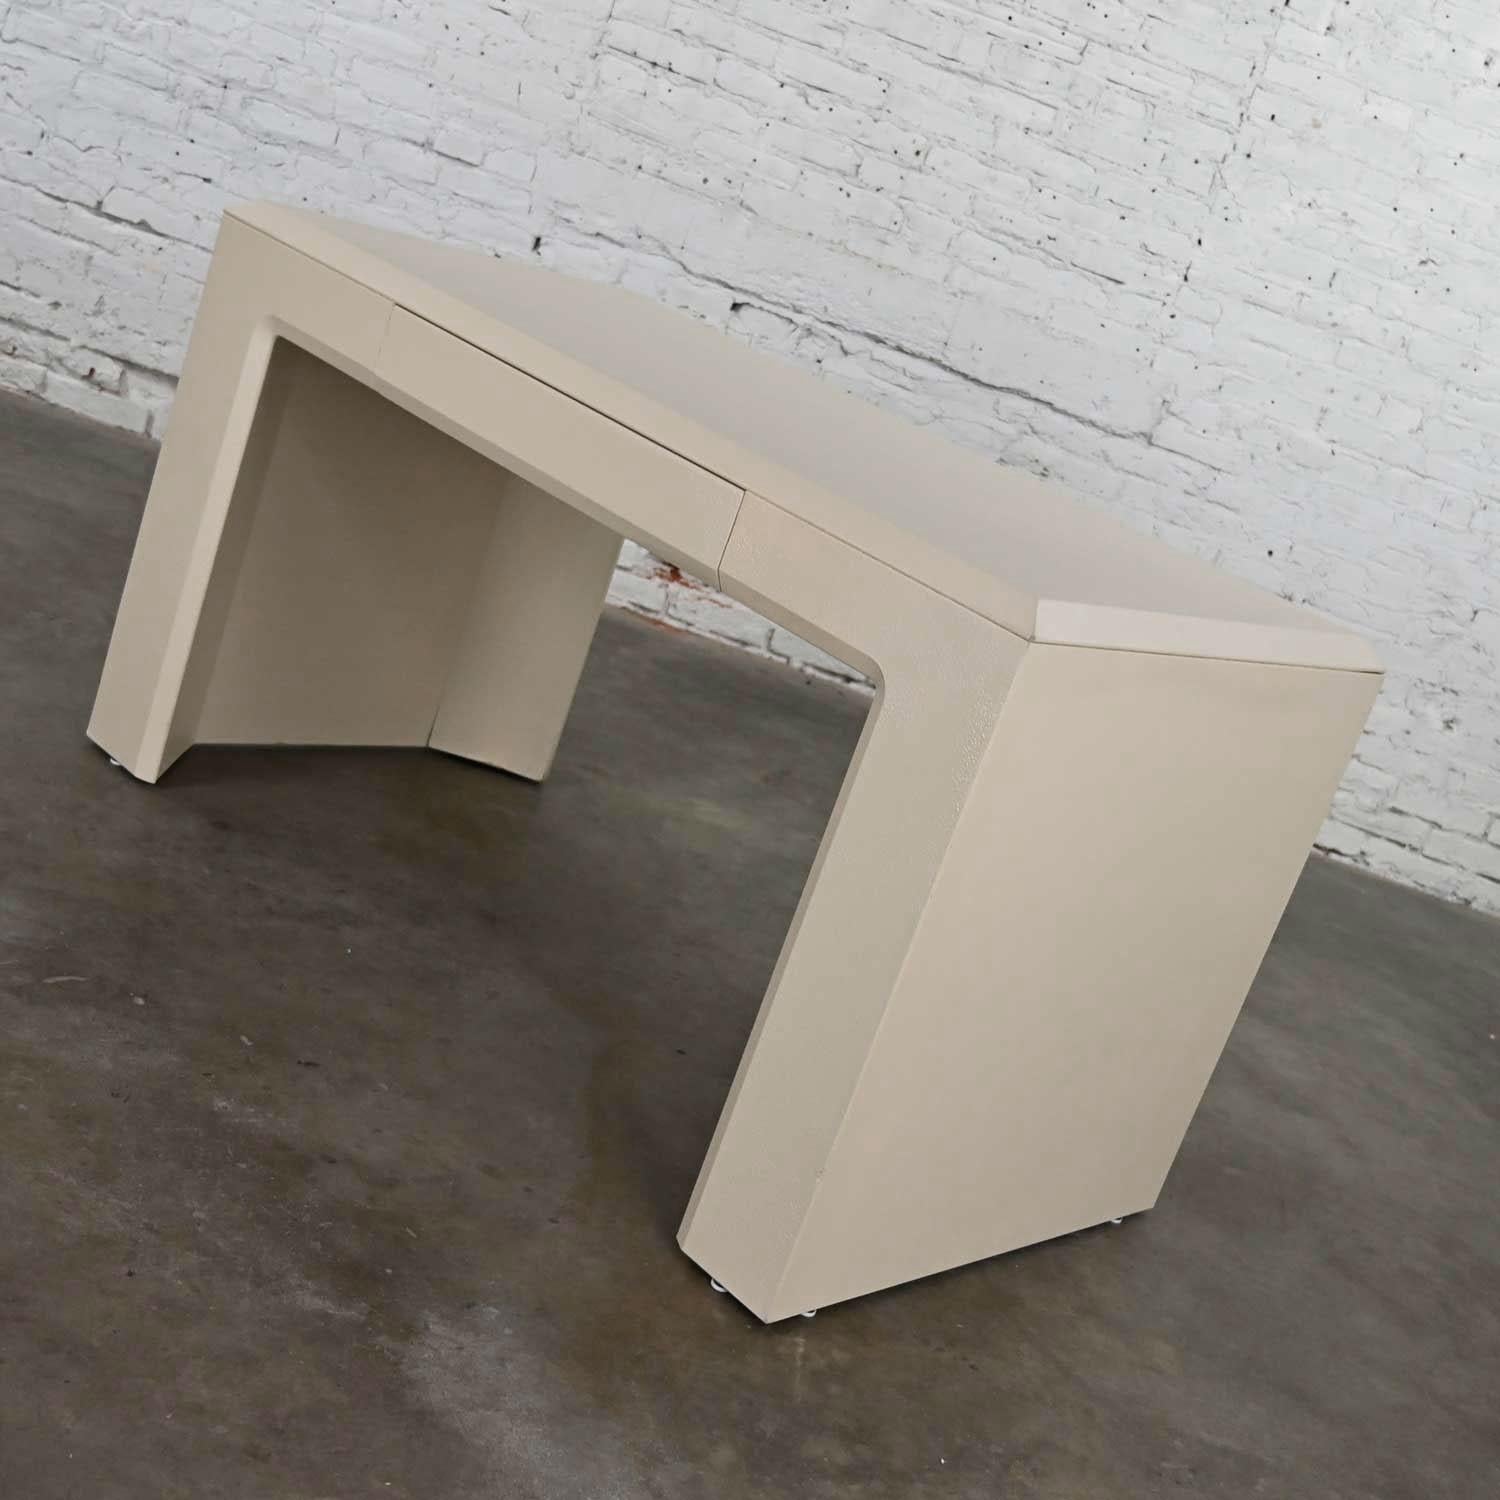 Handsome modern off-white waterfall style writing desk by Lane Alta Vista. All over faux shagreen texture and restored with a new antique white painted finish. Beautiful condition, keeping in mind that this is vintage and not new so will have signs